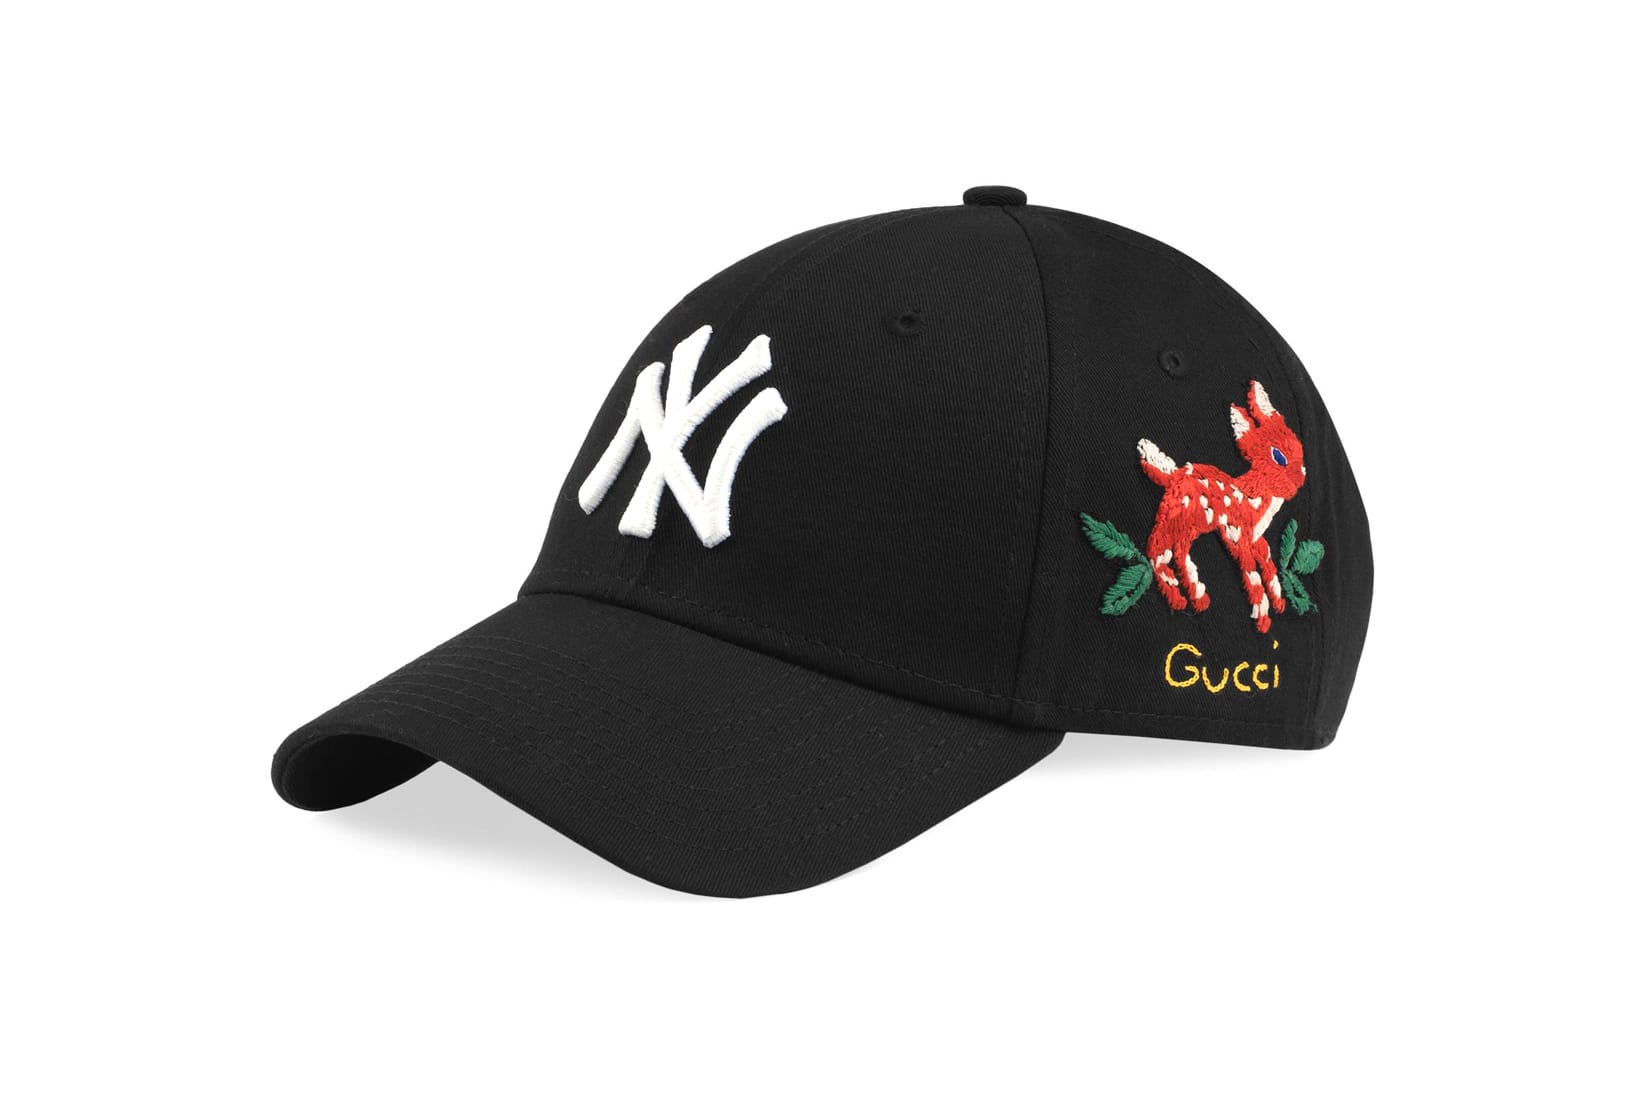 Gucci Ny Yankees Top Sellers, UP TO 65% OFF | elrincondelcervecero.com